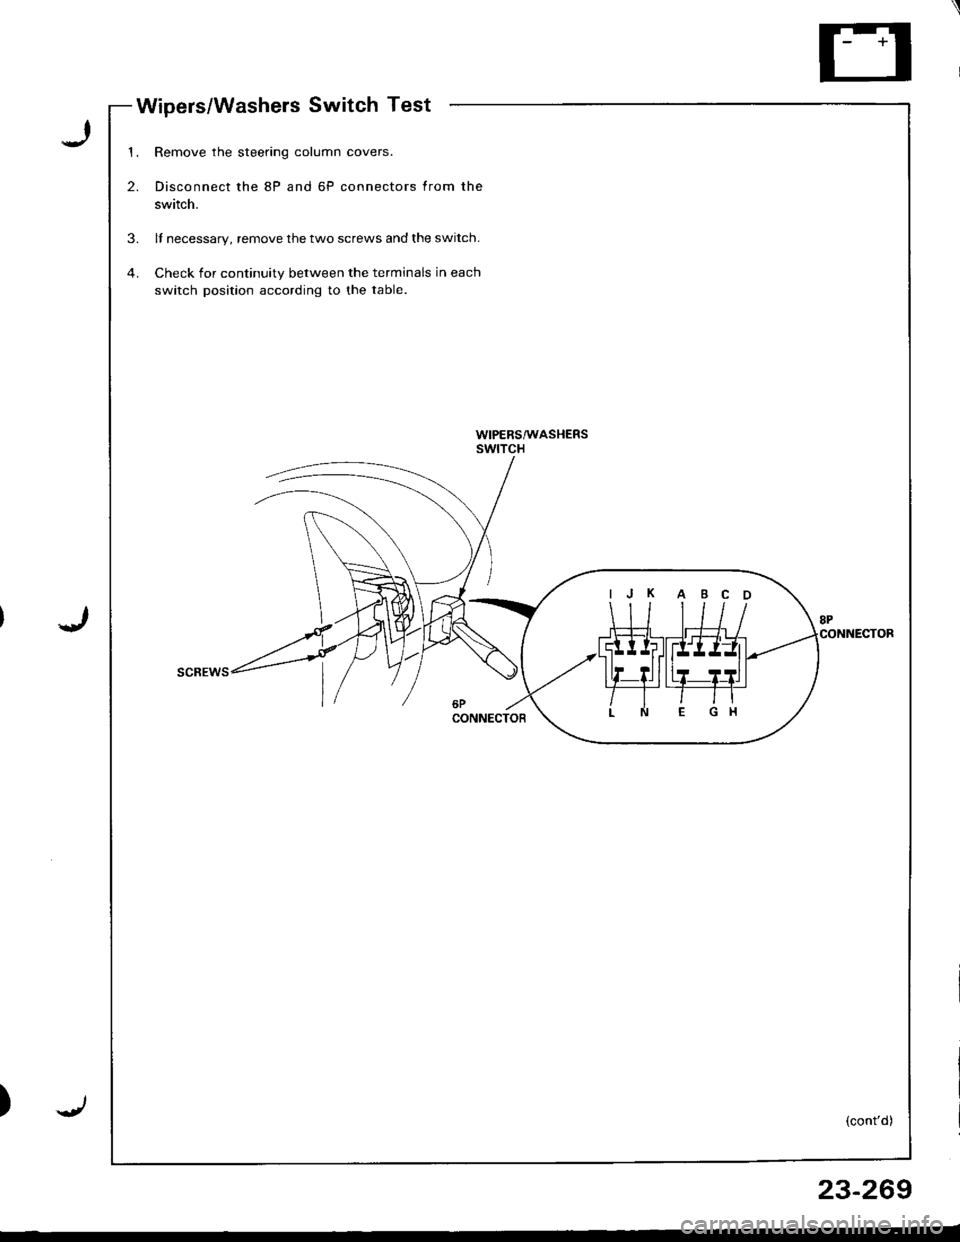 HONDA INTEGRA 1998 4.G Workshop Manual Wipers/Washels Switch Test
I
J
)
1.
2.
Remove the steering column covers.
Disconnect the 8P and 6P connectors from the
switch.
ll necessary, remove the two screws and the switch.
Check for continuity 